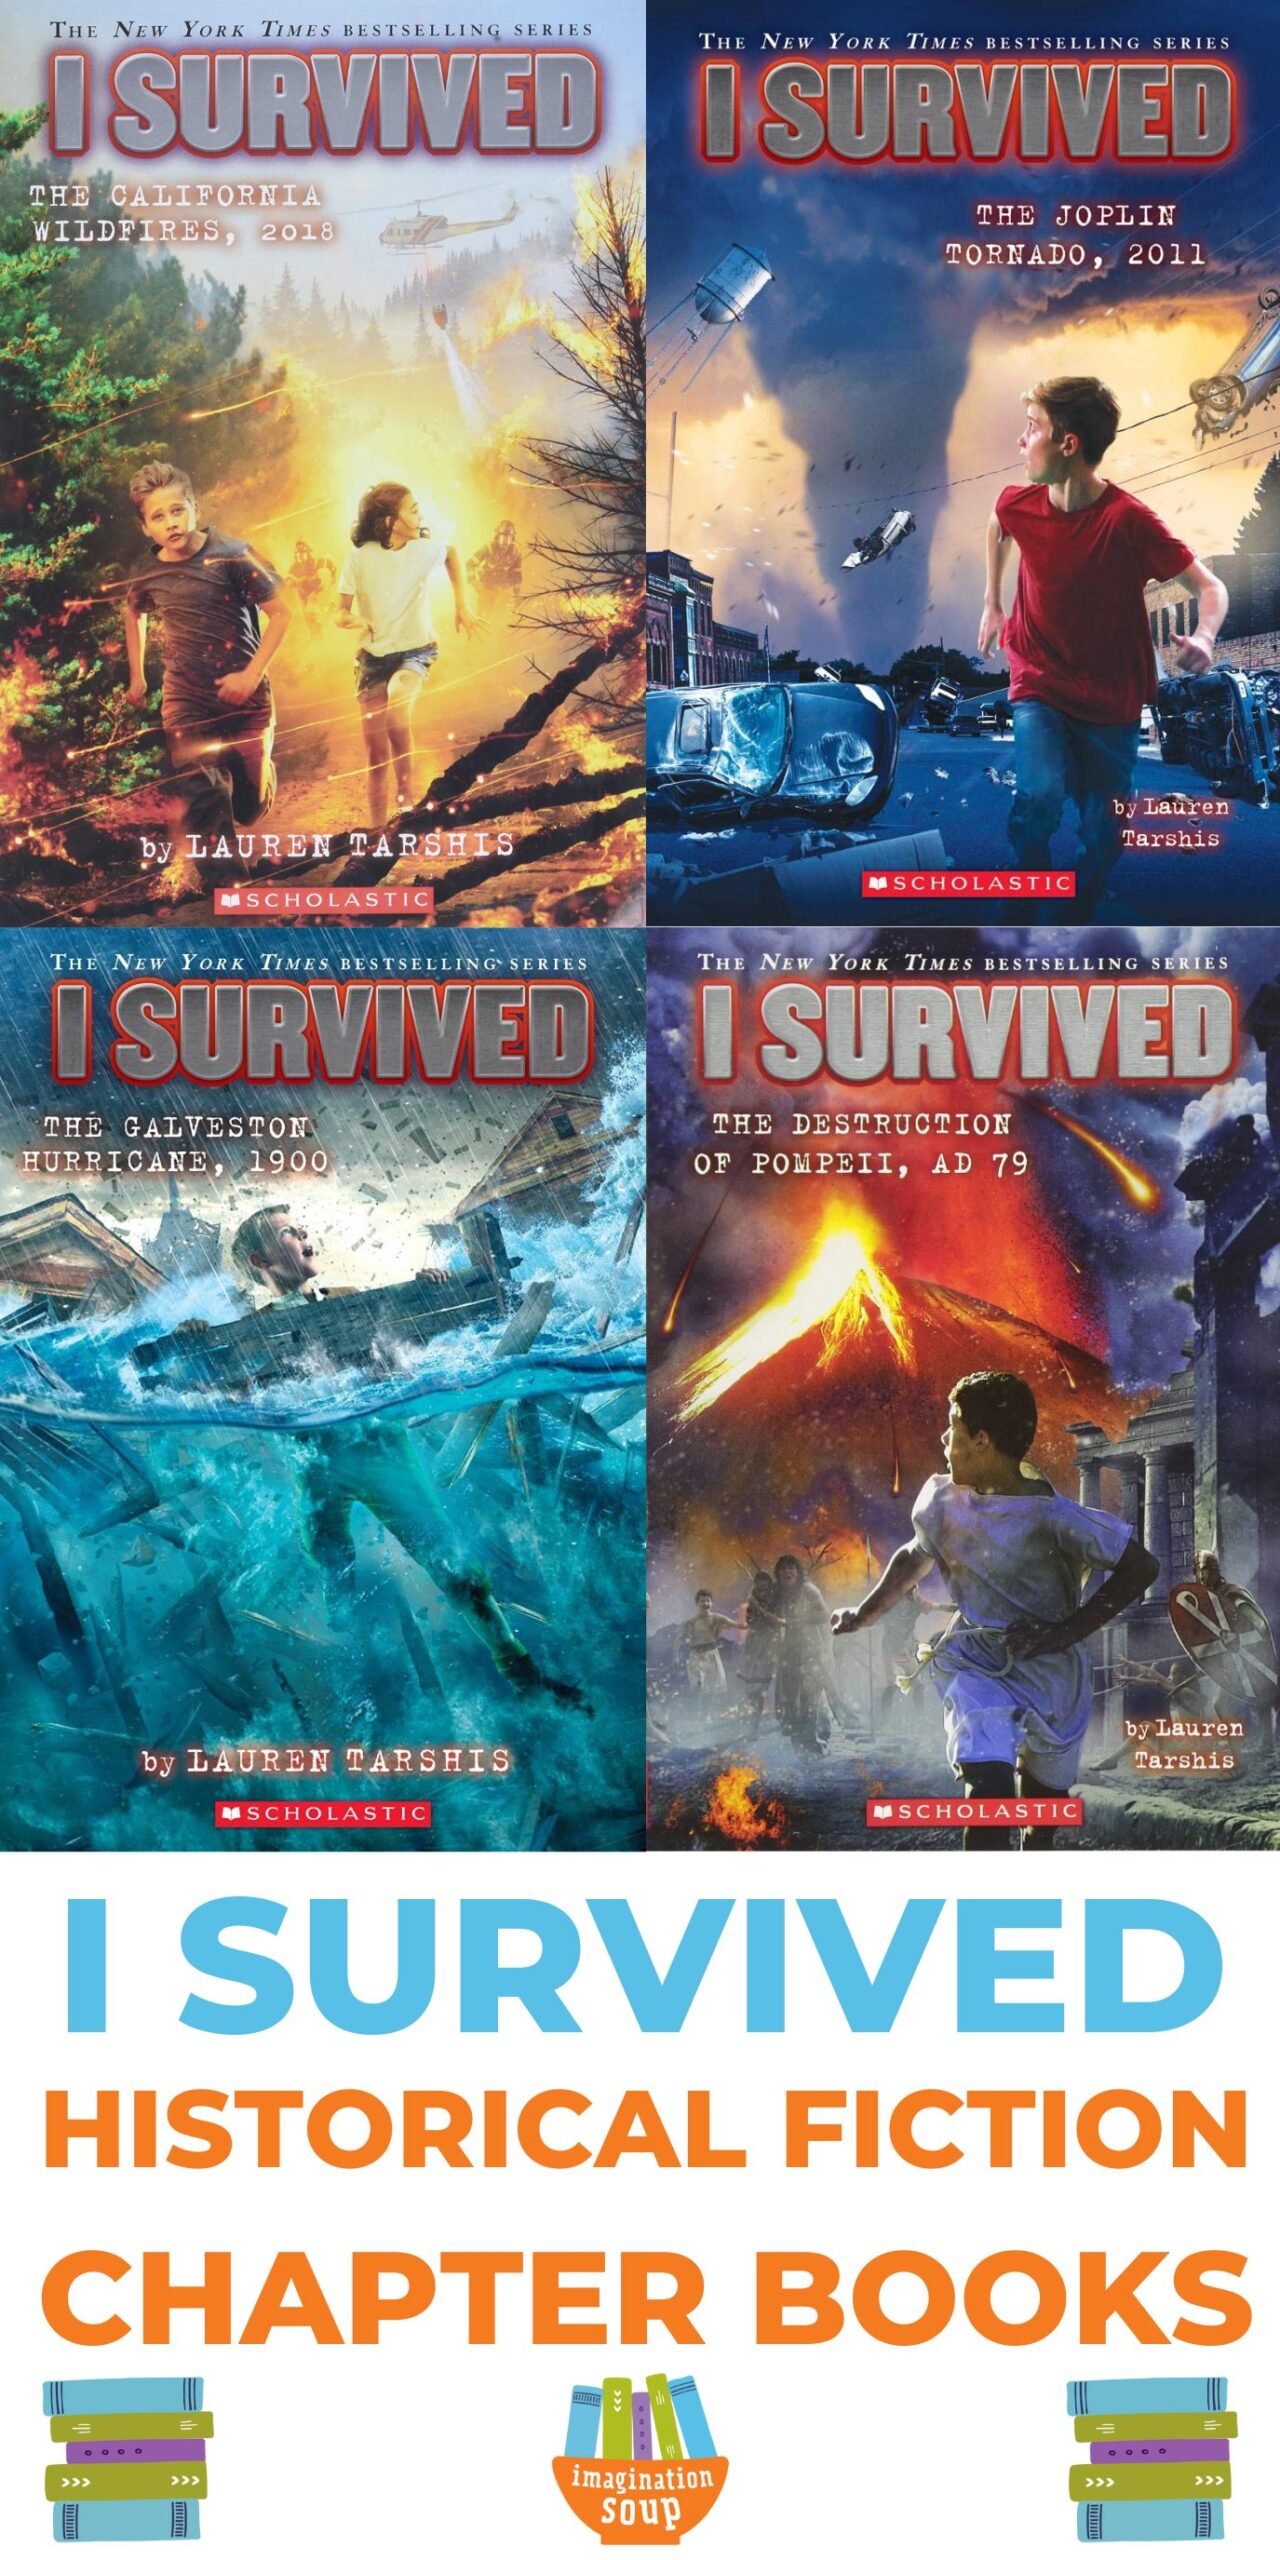 The I Survived series numbers nearly two dozen popular chapter books for ages 7 to 10 by Lauren Tarshis. The series, which includes historical fiction as well as eight complementary graphic editions and several nonfiction titles, focus on the resilience and strength of young people in the midst of disasters, both natural and human made. 